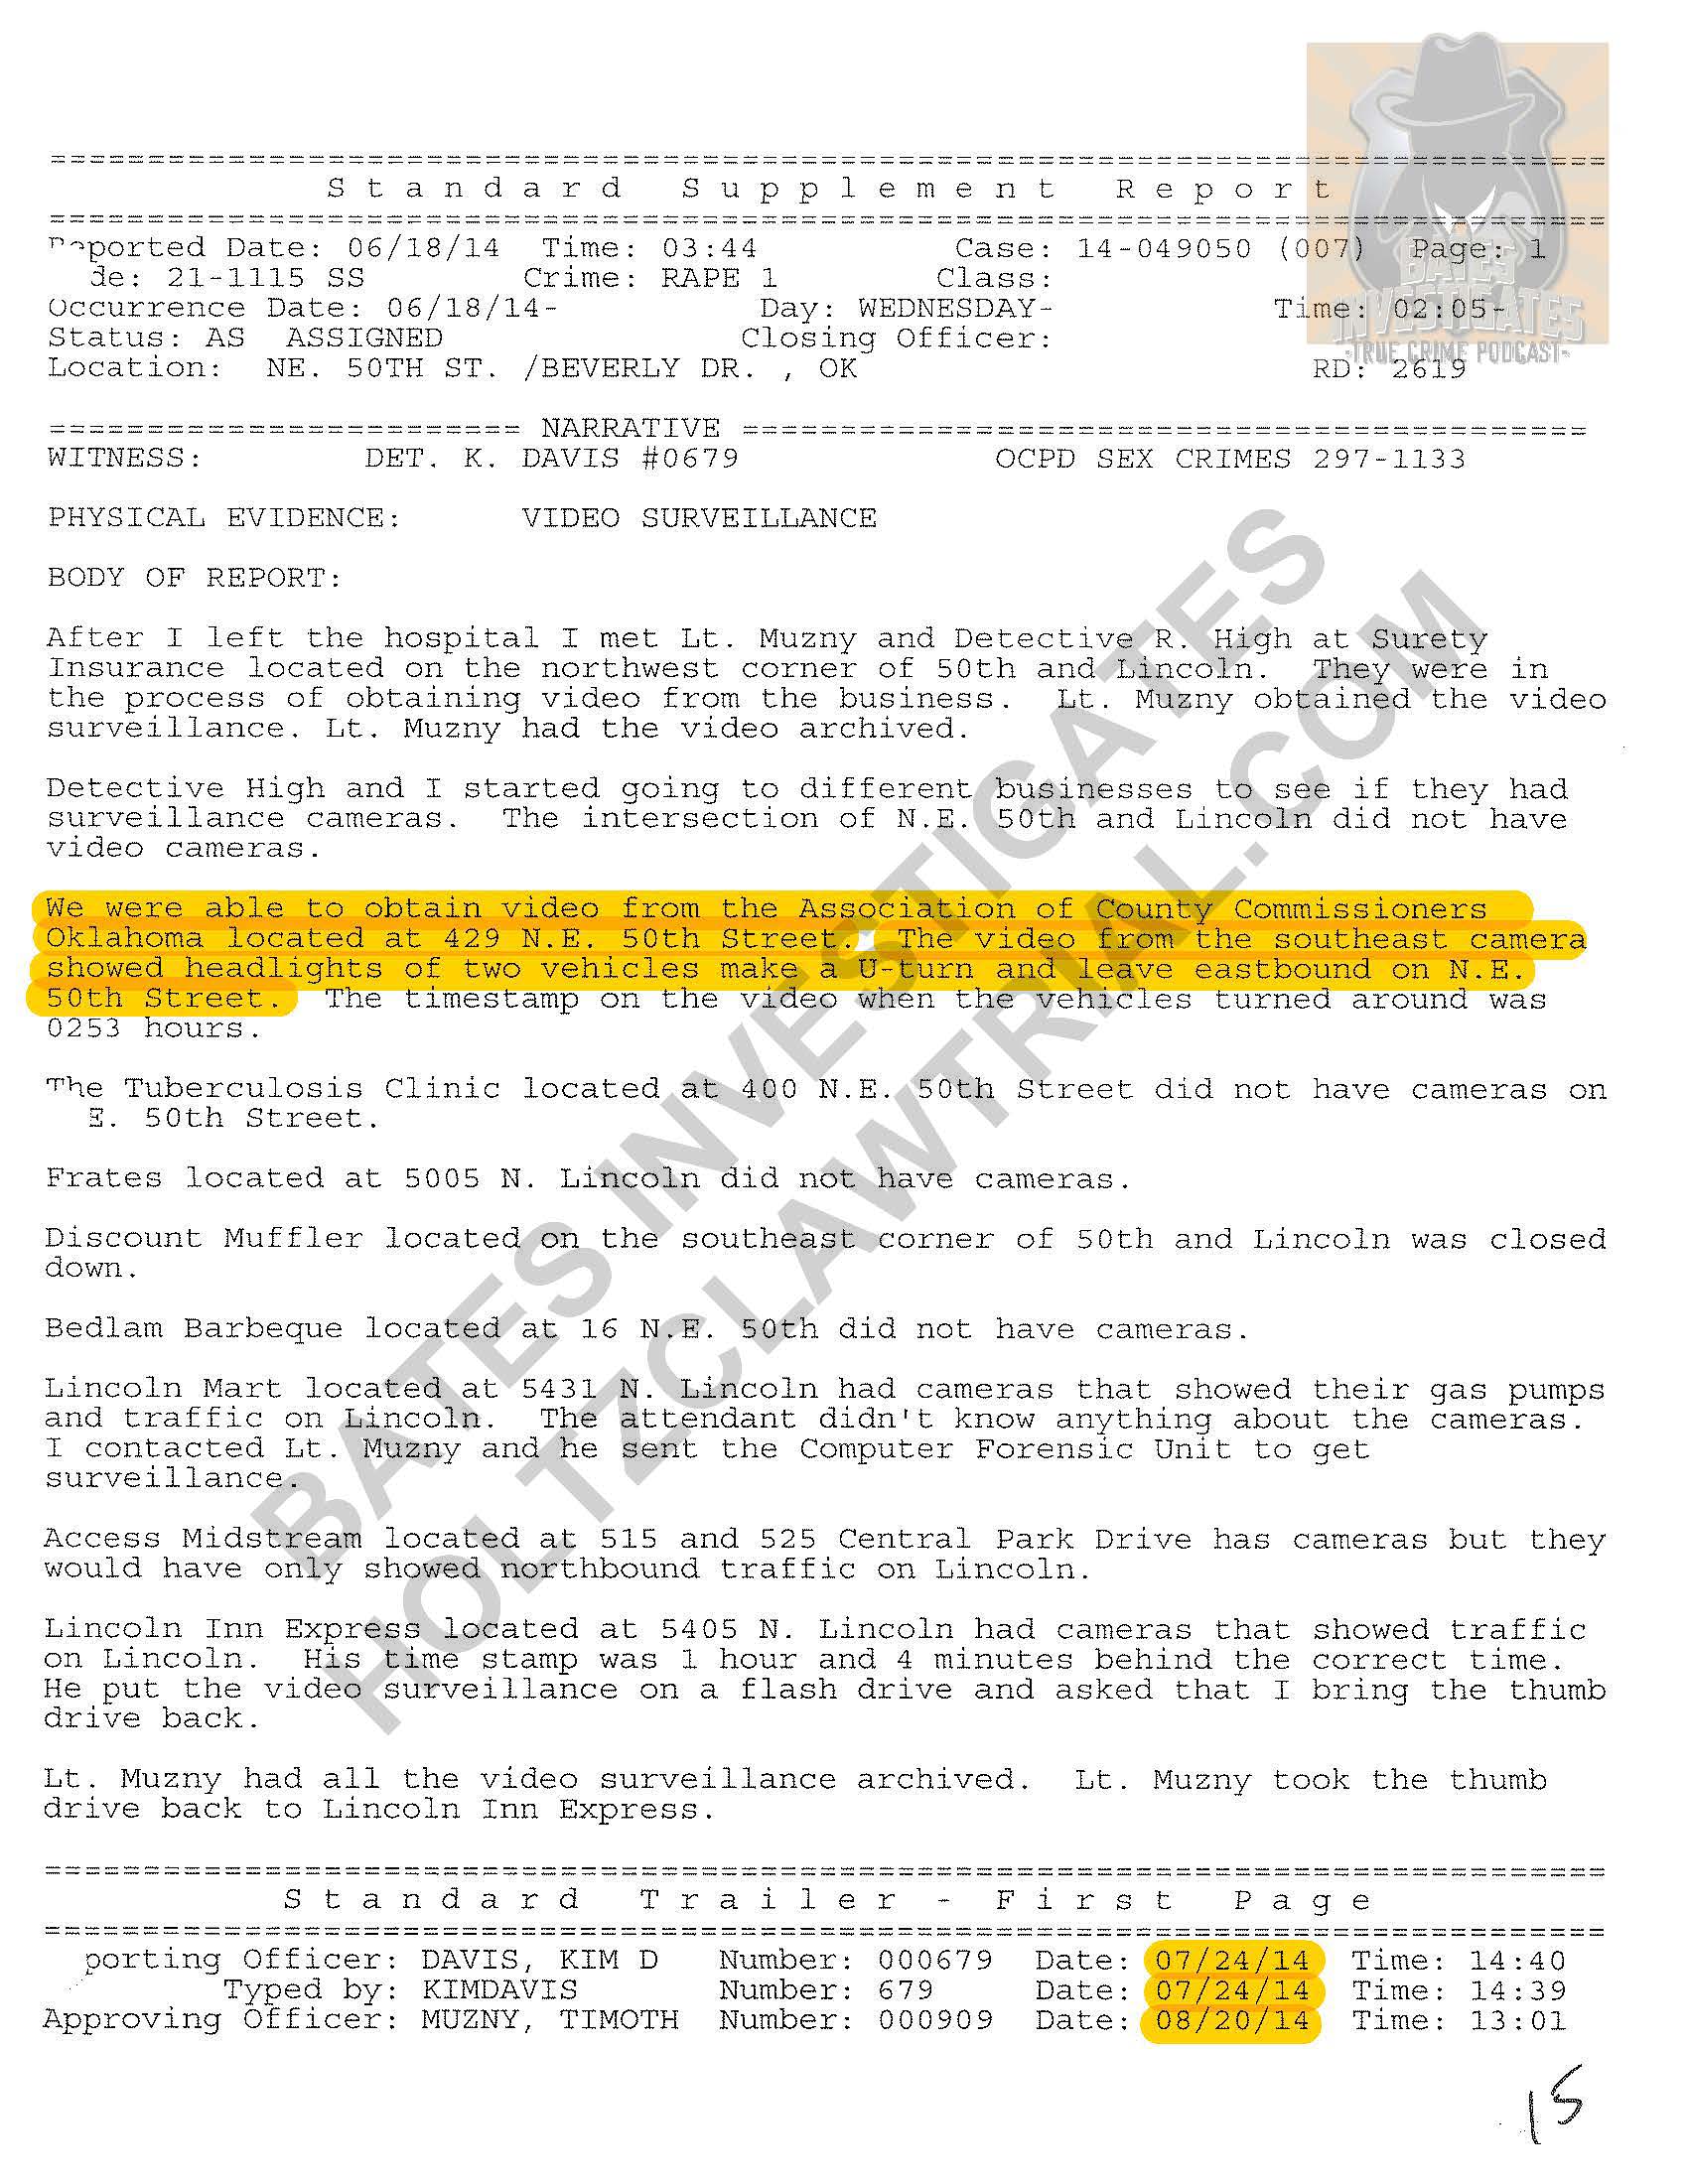 Holtzclaw - Ep02 - Police Reports Watermarked_Page_24.jpg